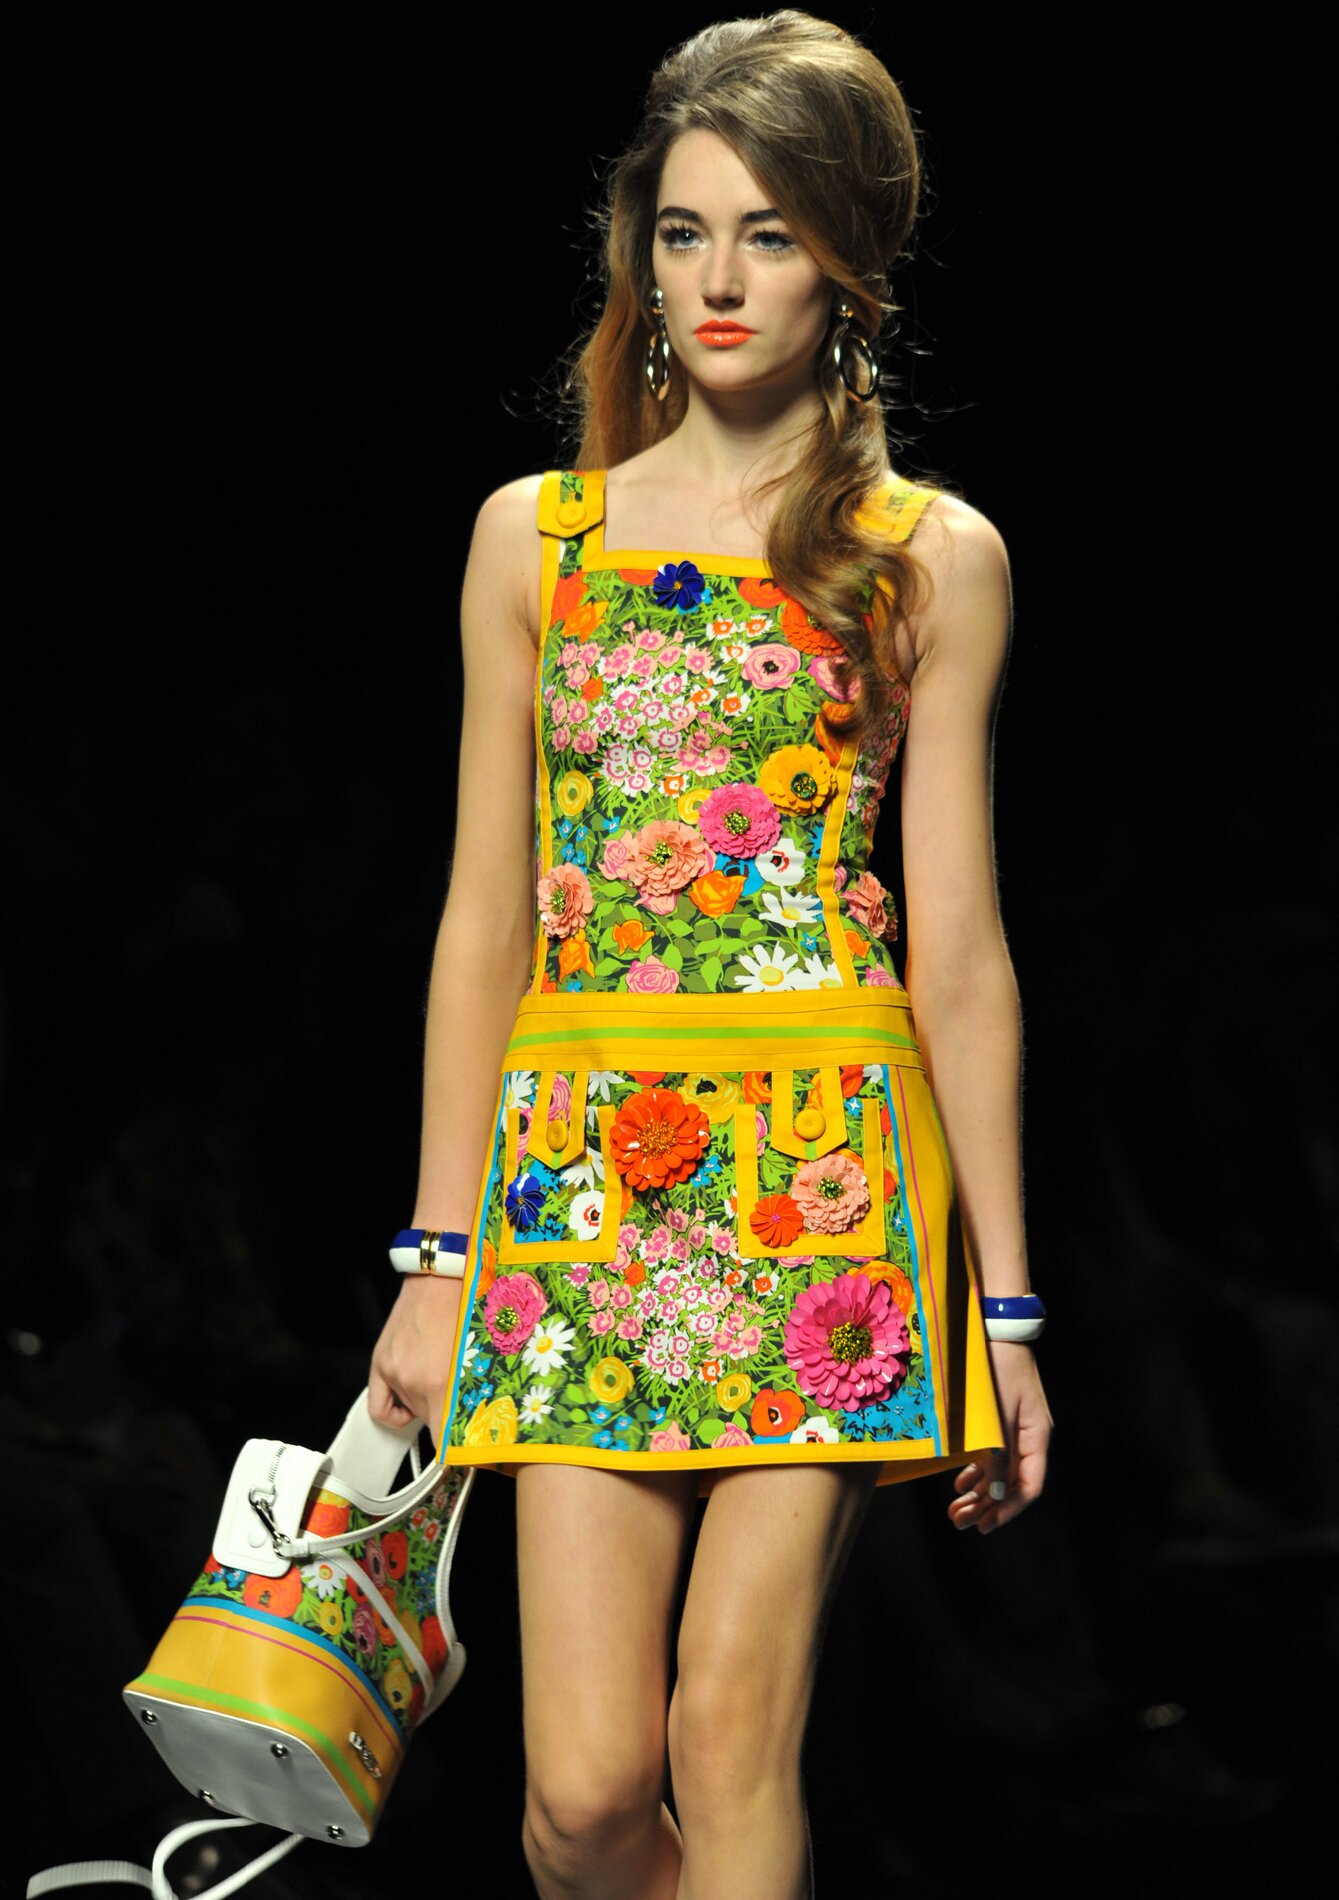 MOSCHINO SPRING SUMMER 2013 WOMEN'S COLLECTION | The Skinny Beep
